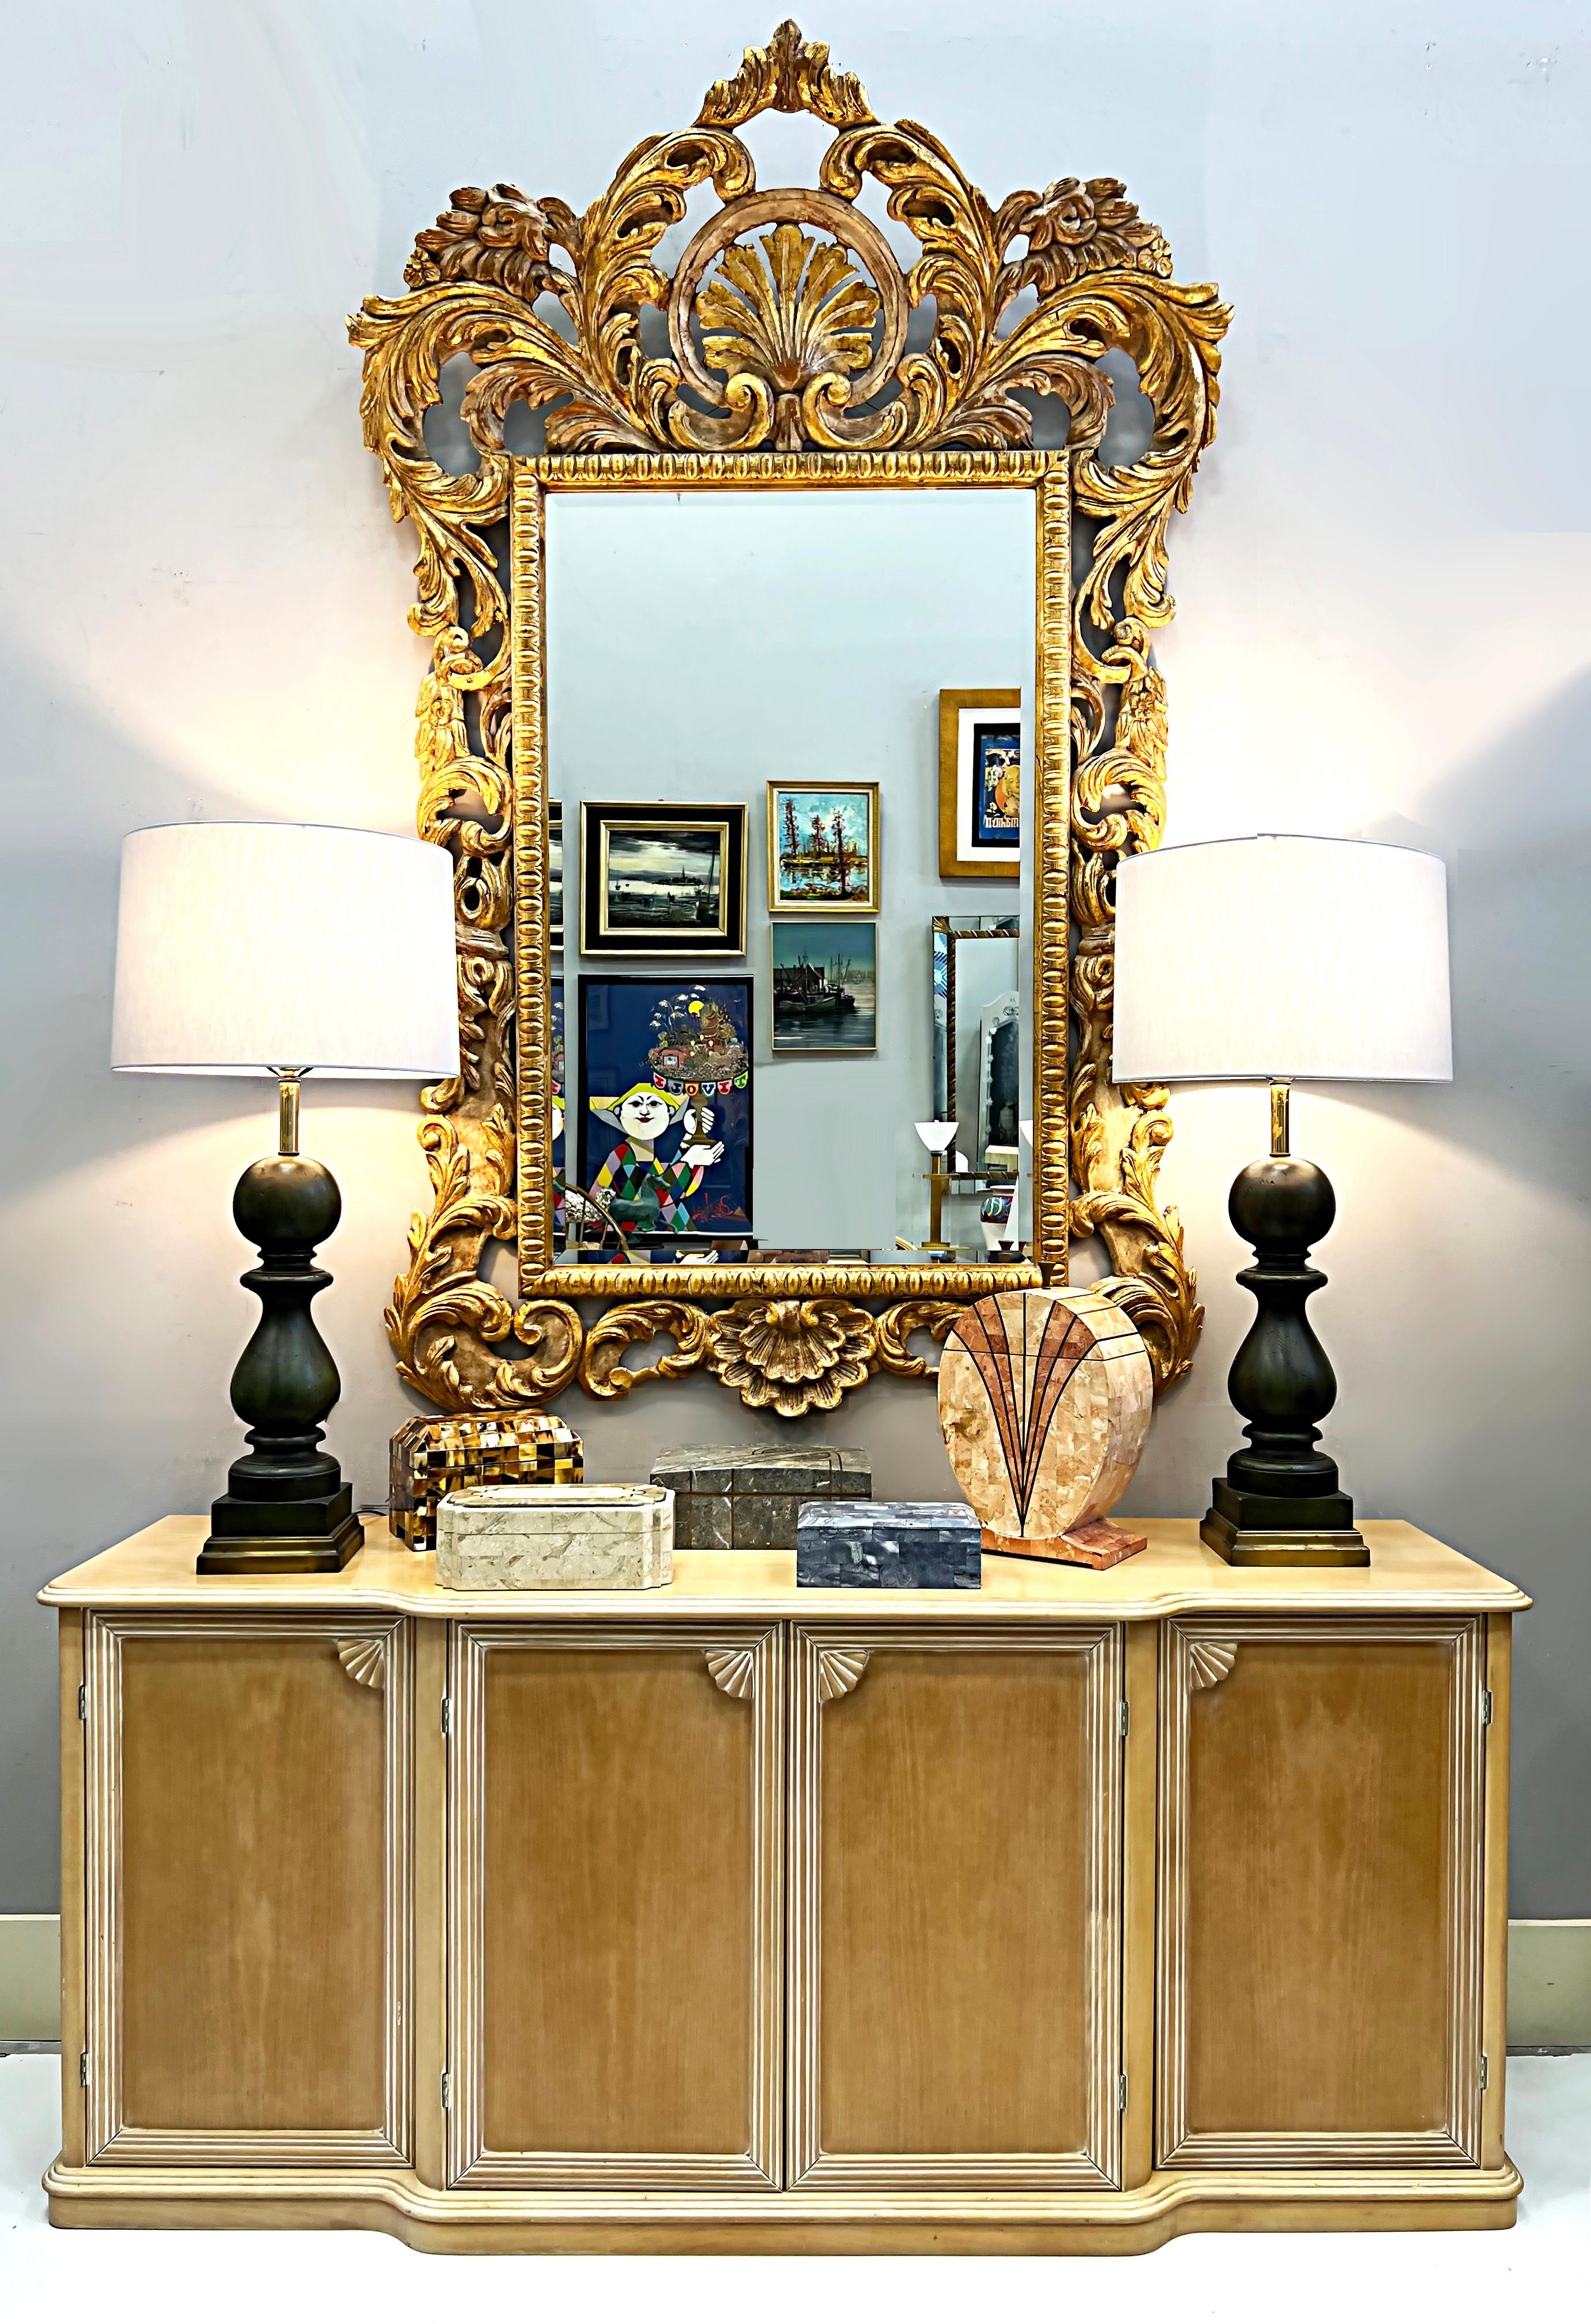 Monumental Italian Carved Gilt Wall Mirror, Hollywood Regency Style 
 
Offered for sale is a monumental and elegant Italian Hollywood Regency-style carved giltwood wall mirror with ornately carved leaf and shell motifs. The mirror has a